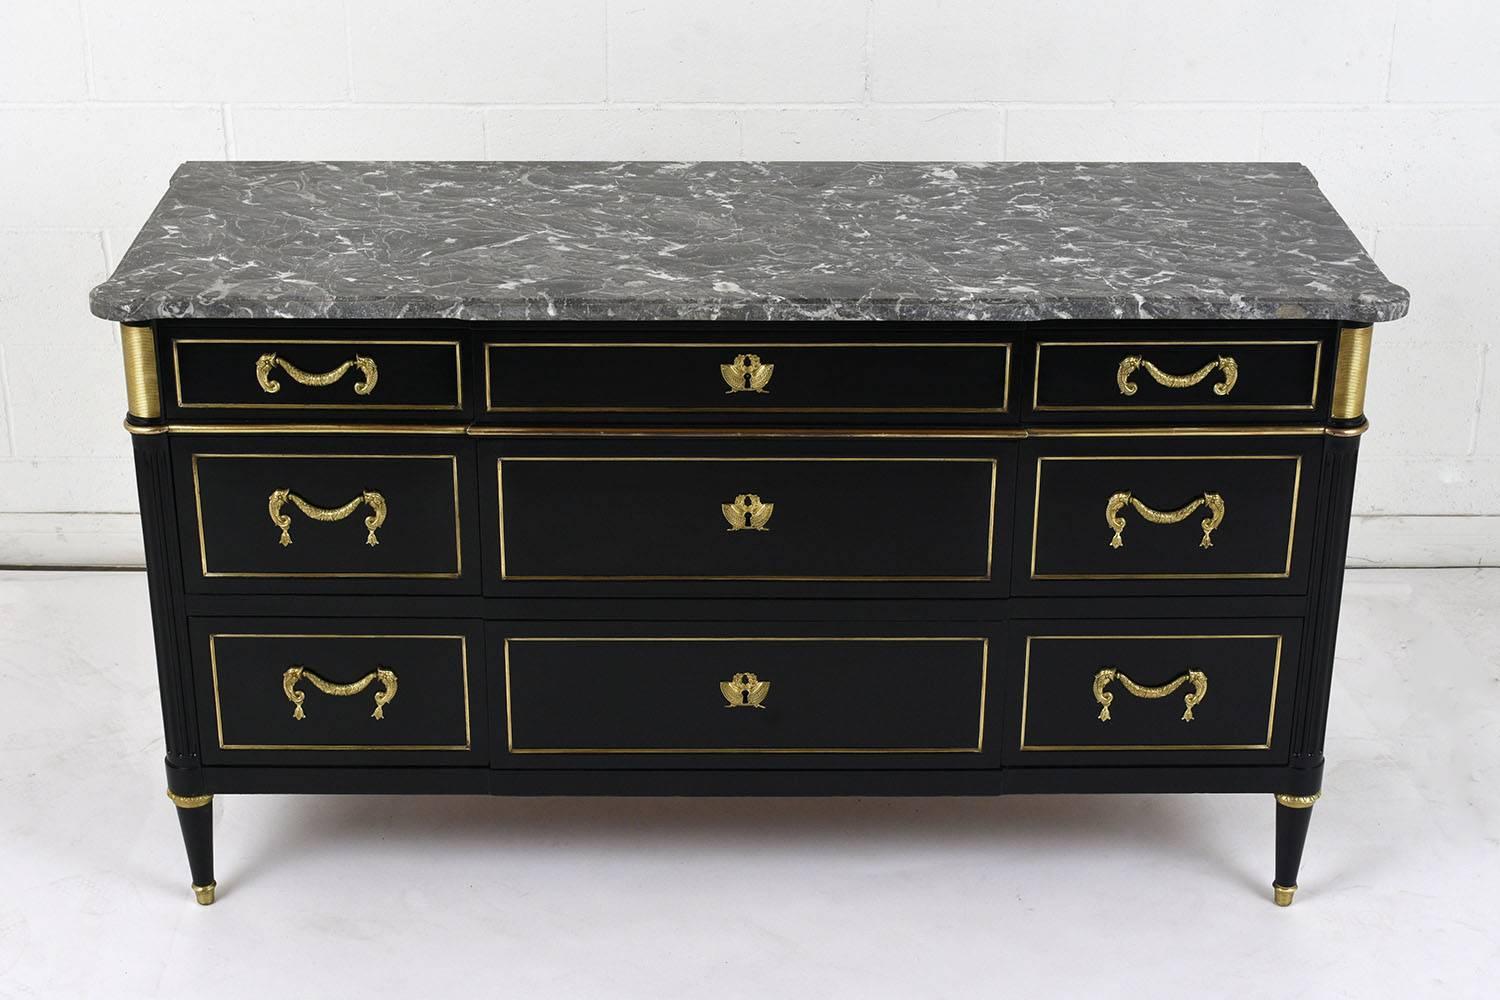 This 1900s, Maison Jansen buffet is made of mahogany wood with an ebonized and polished finish. The original marble top is a dark gray color with white veins and a beveled edge. The buffet has nine drawers in varying sizes with ample storage space.